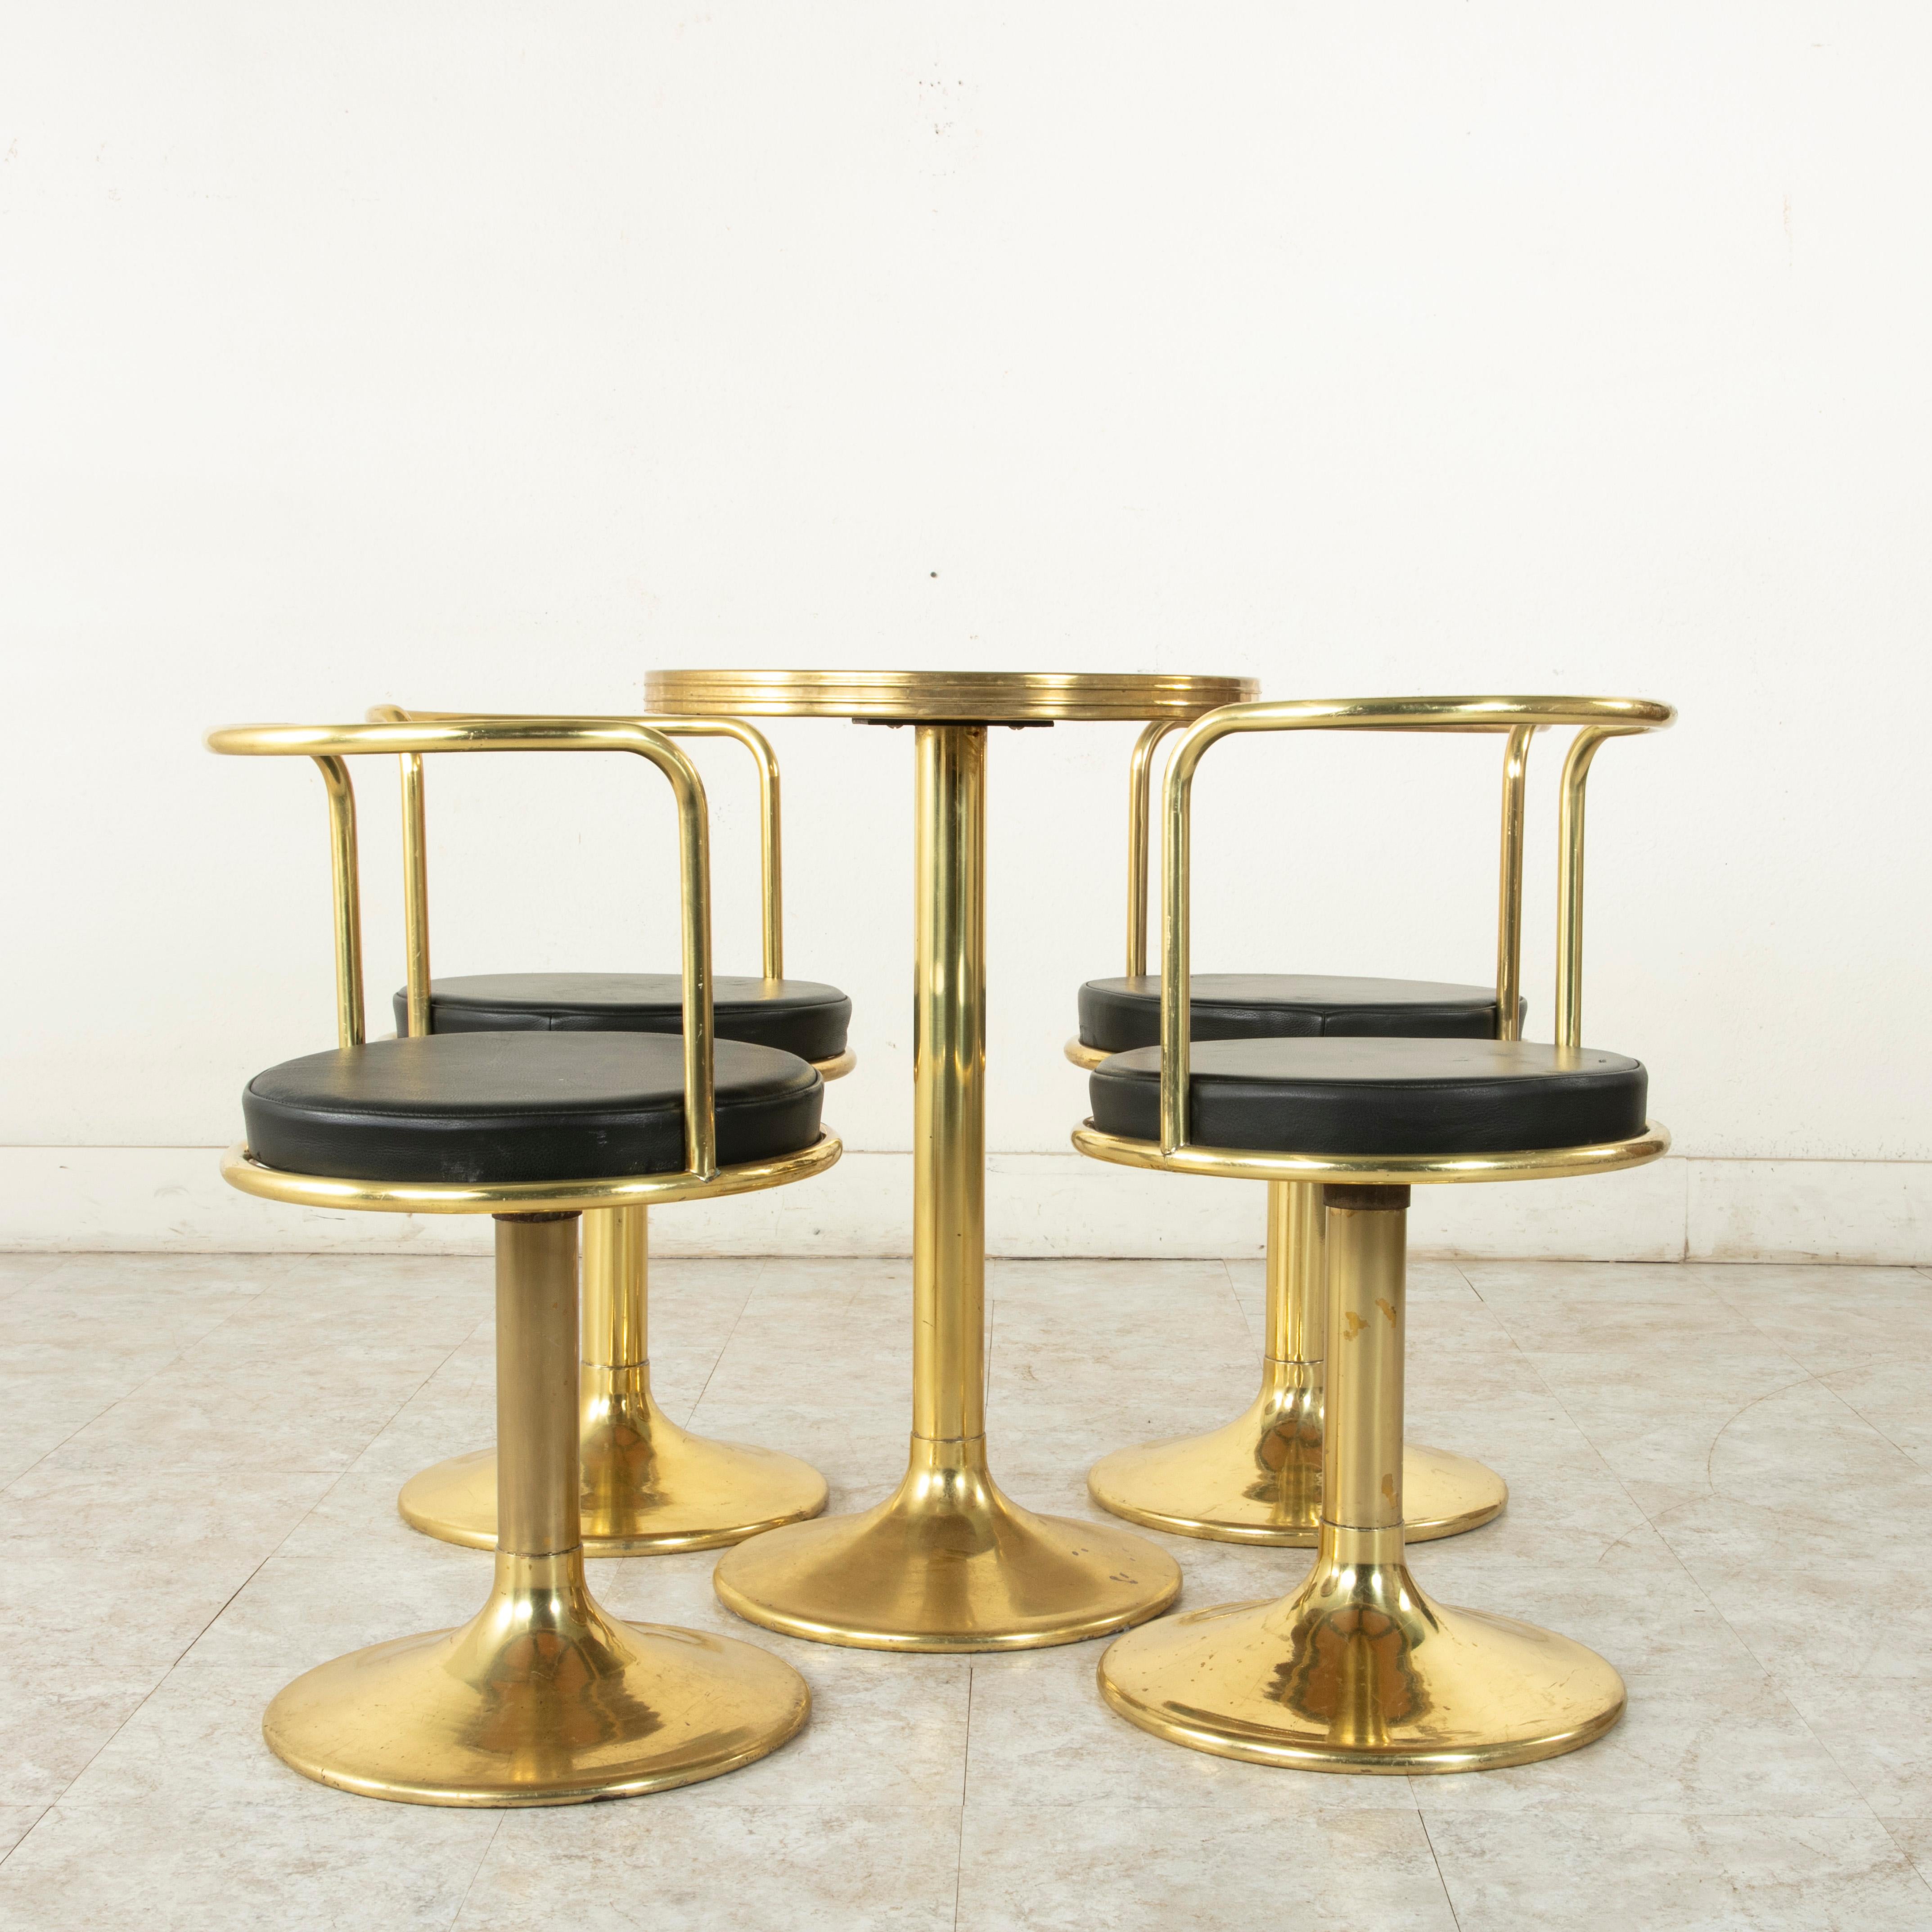 Originally used in the La Meuliere cabaret in Paris, this midcentury brass bistro set features a circular table with a black marble top and four chairs upholstered in black skai. The set rests on footed bases that gently slope outward. Its chairs